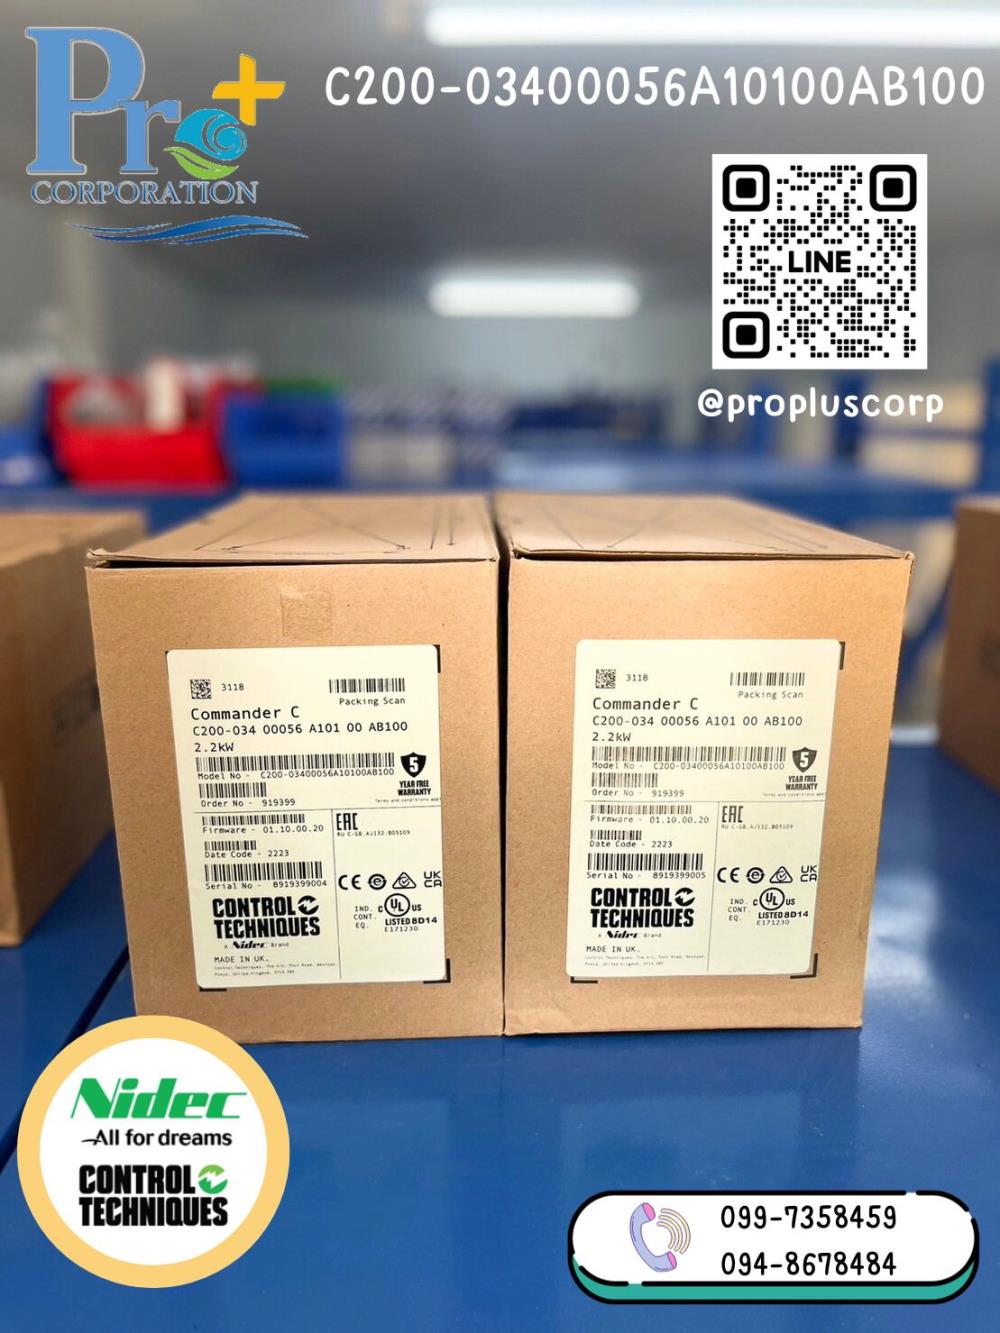 NIDEC Control Techniques C200-03400056A10100AB100 ,C200-03400056A10100AB100 ,NIDEC Control Techniques,Electrical and Power Generation/Electrical Equipment/Inverters